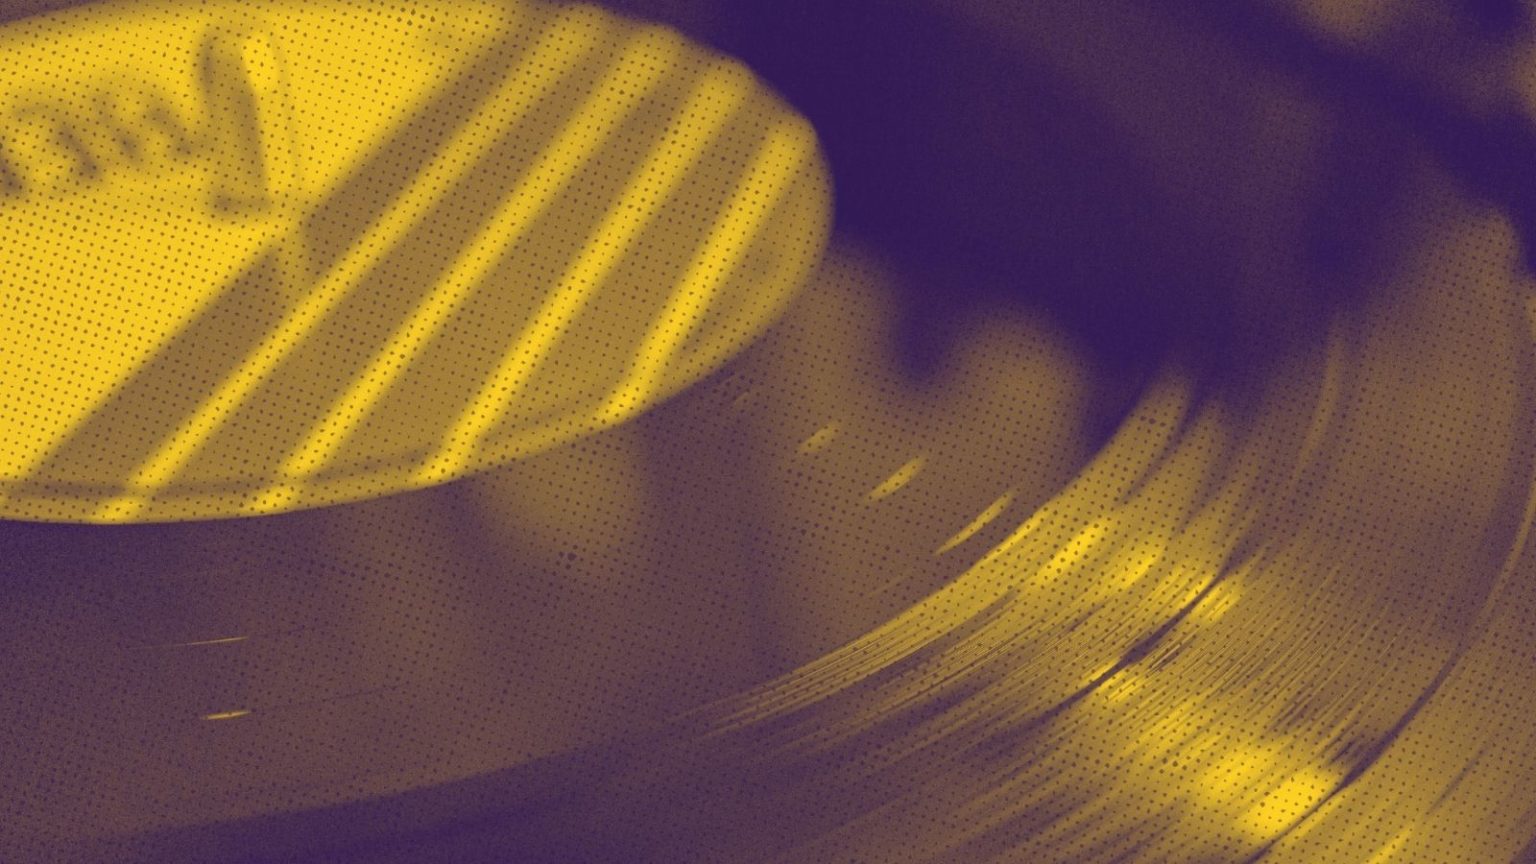 Photo of vinyl record close up and pixelated